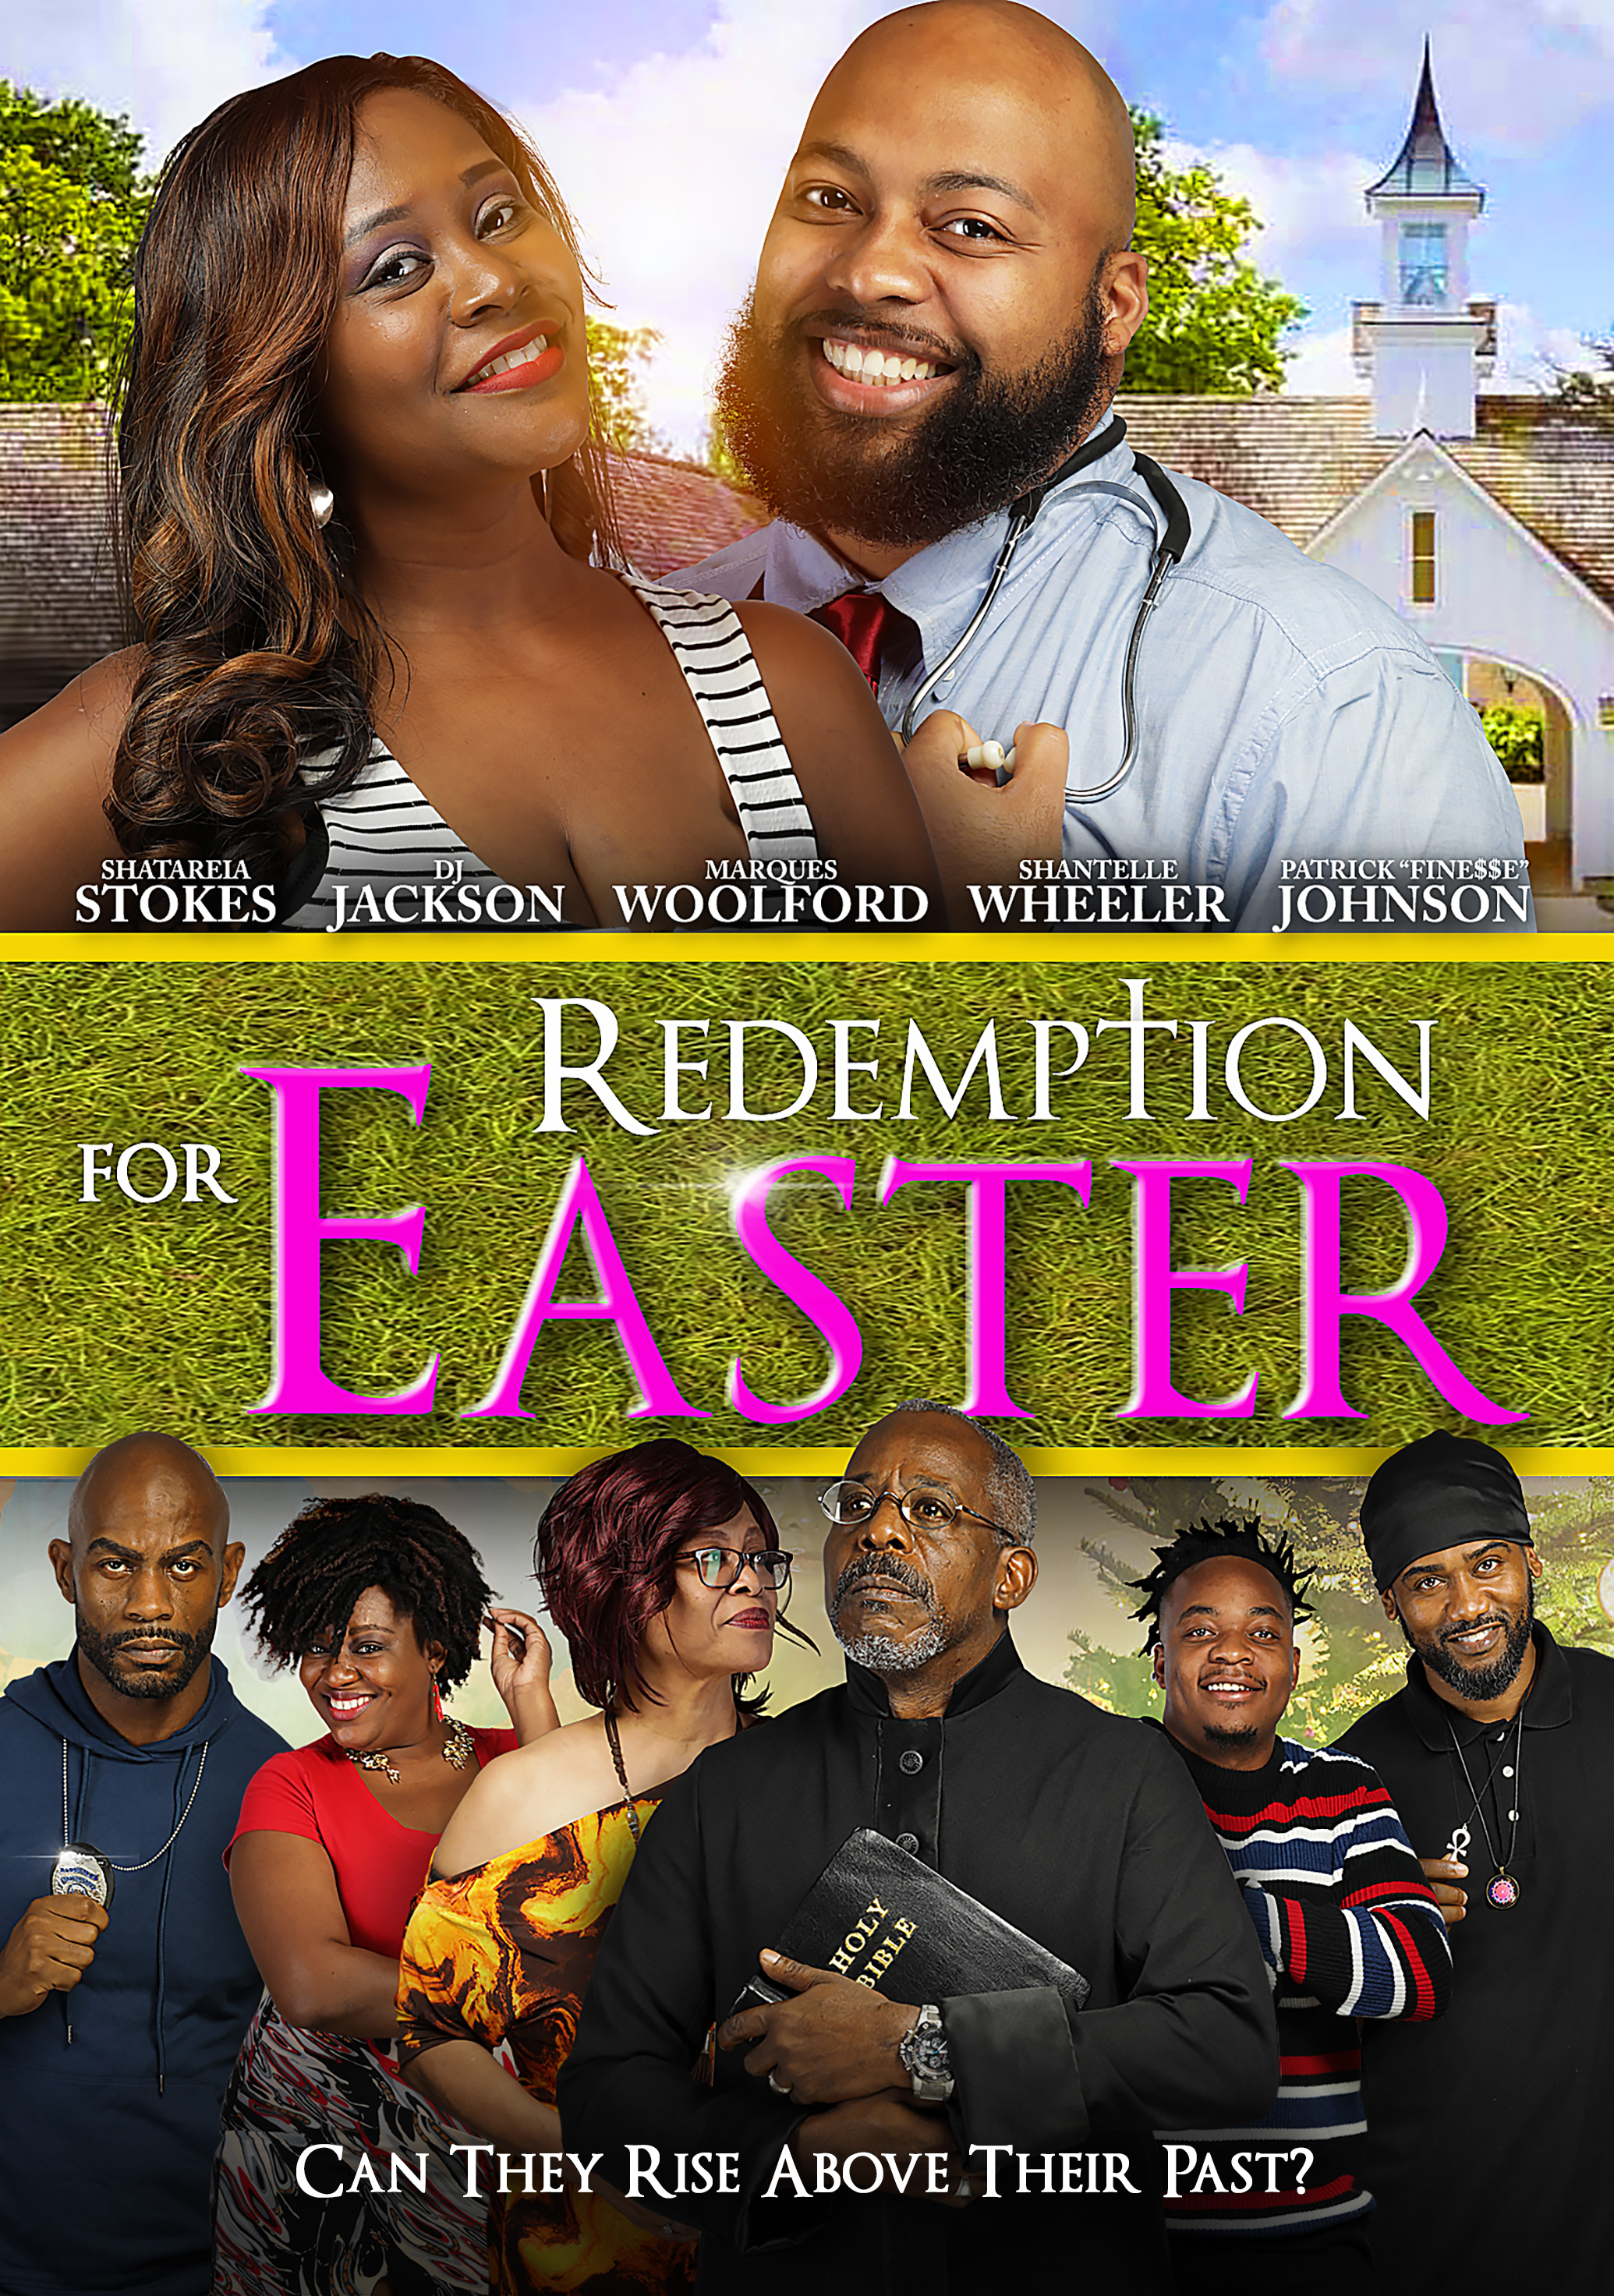 Movie Poster for Redemption for Easter